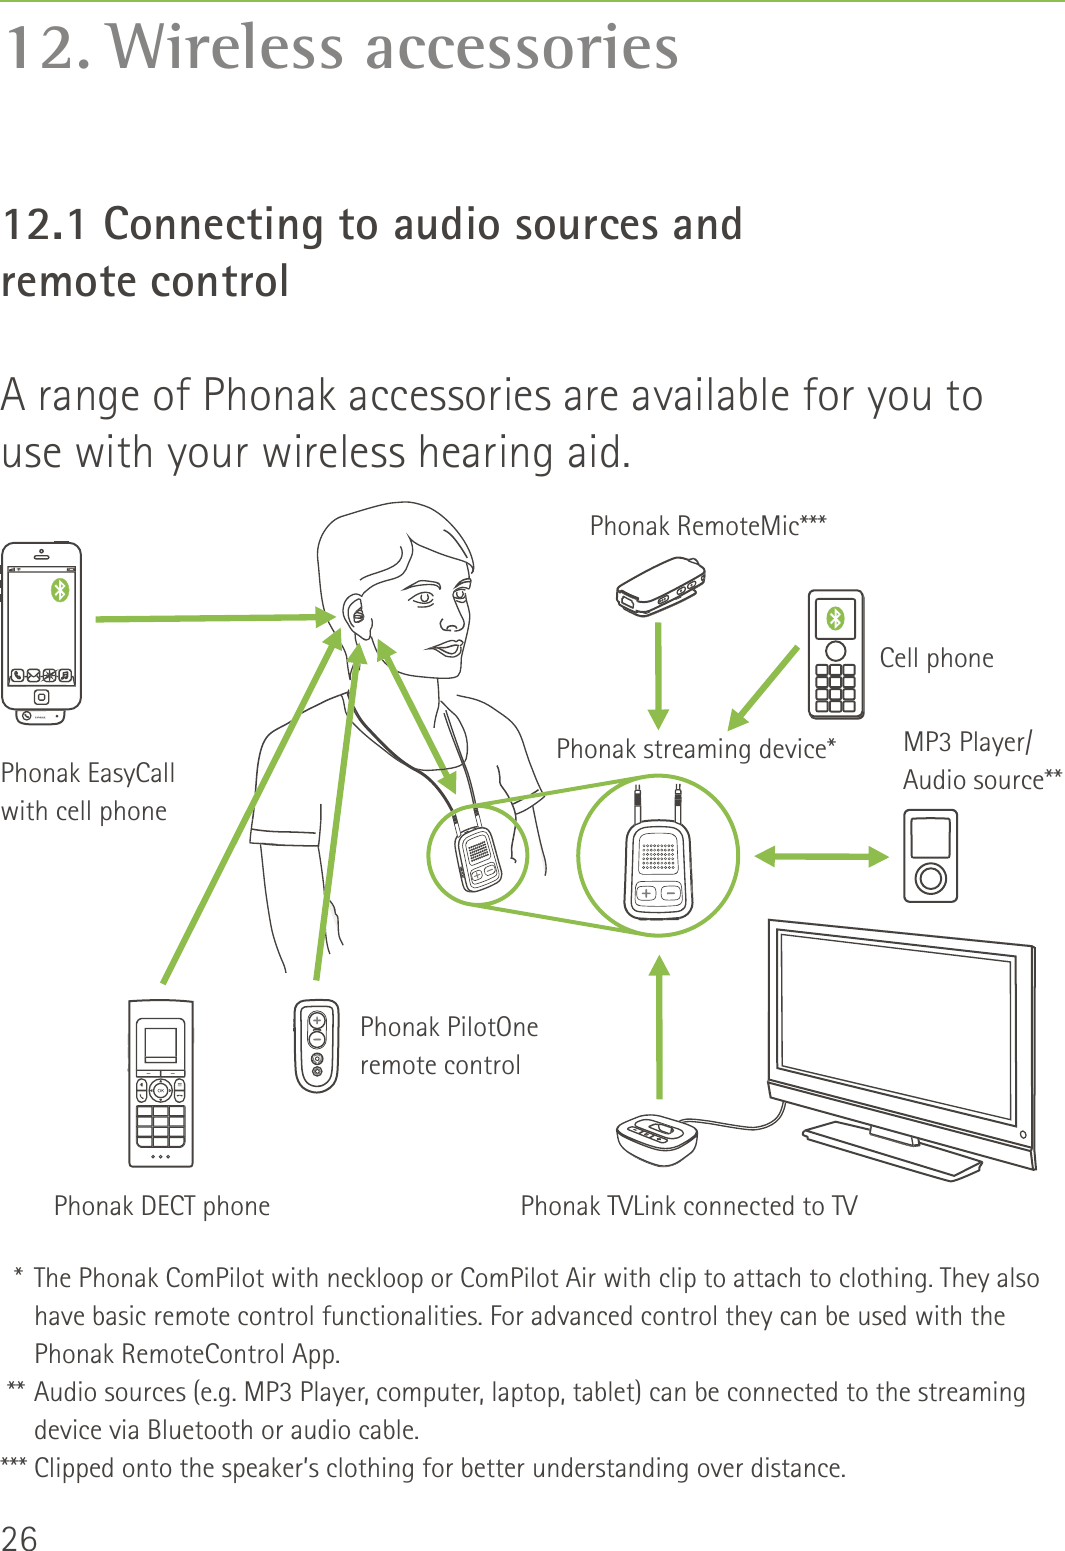 2612. Wireless accessories12.1 Connecting to audio sources and  remote controlA range of Phonak accessories are available for you to  use with your wireless hearing aid.  *  The Phonak ComPilot with neckloop or ComPilot Air with clip to attach to clothing. They also have basic remote control functionalities. For advanced control they can be used with the Phonak RemoteControl App.  ** Audio sources (e.g. MP3 Player, computer, laptop, tablet) can be connected to the streaming device via Bluetooth or audio cable.*** Clipped onto the speaker’s clothing for better understanding over distance.Cell phonePhonak streaming device*Phonak EasyCallwith cell phonePhonak RemoteMic***MP3 Player/Audio source**Phonak TVLink connected to TVPhonak PilotOneremote controlPhonak DECT phone